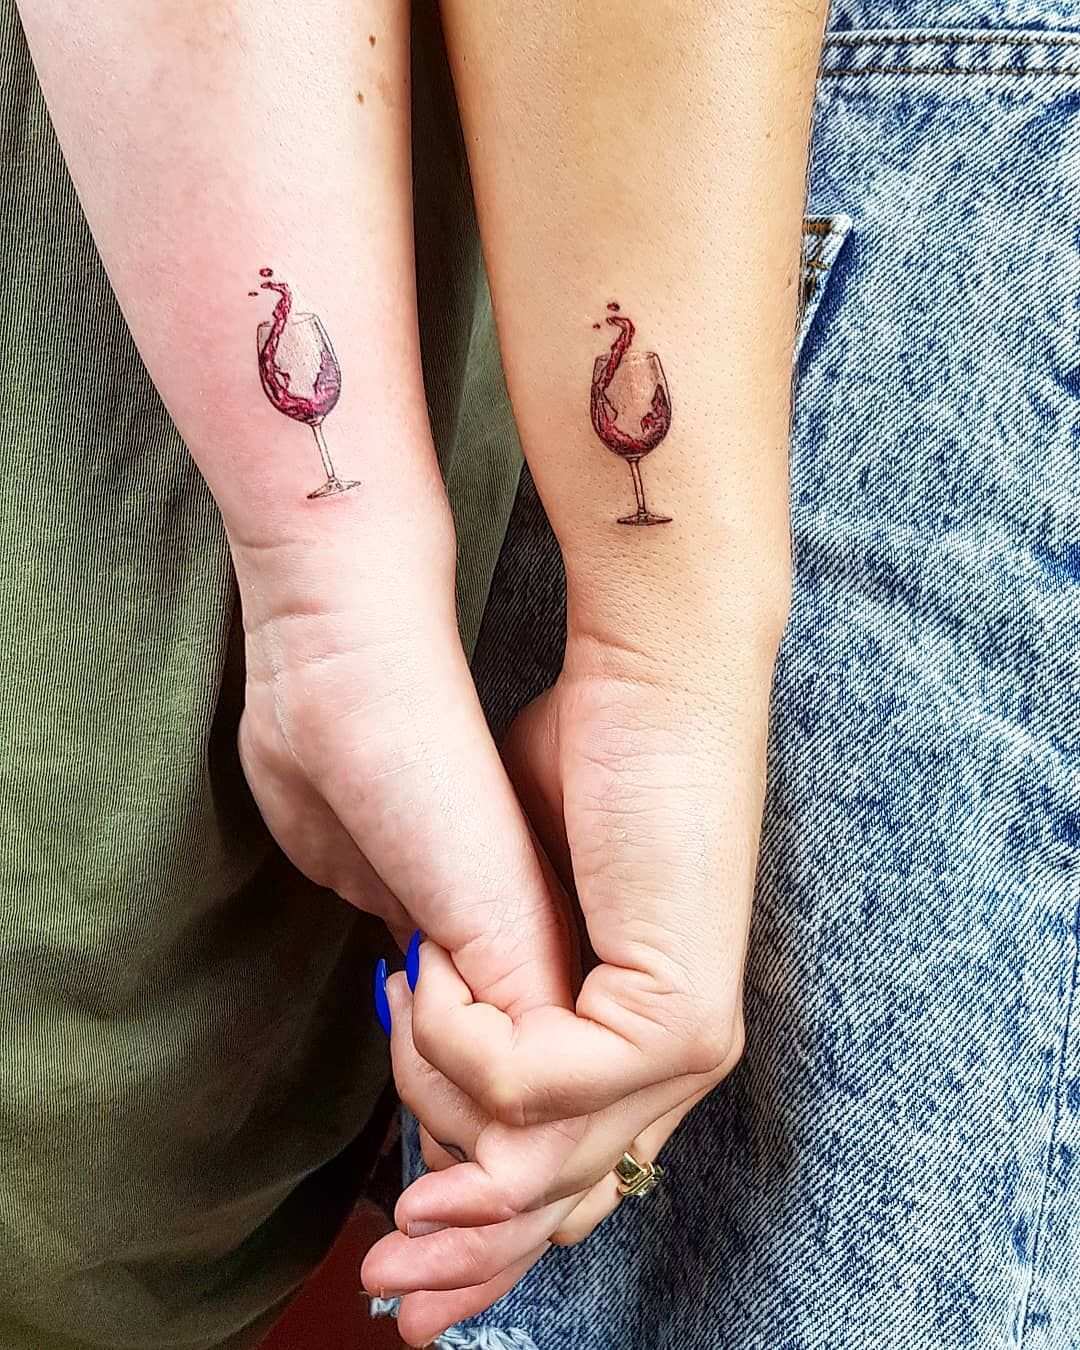 Meaningful Tattoo Ideas for Family Bonding | by Acetattoos | Medium